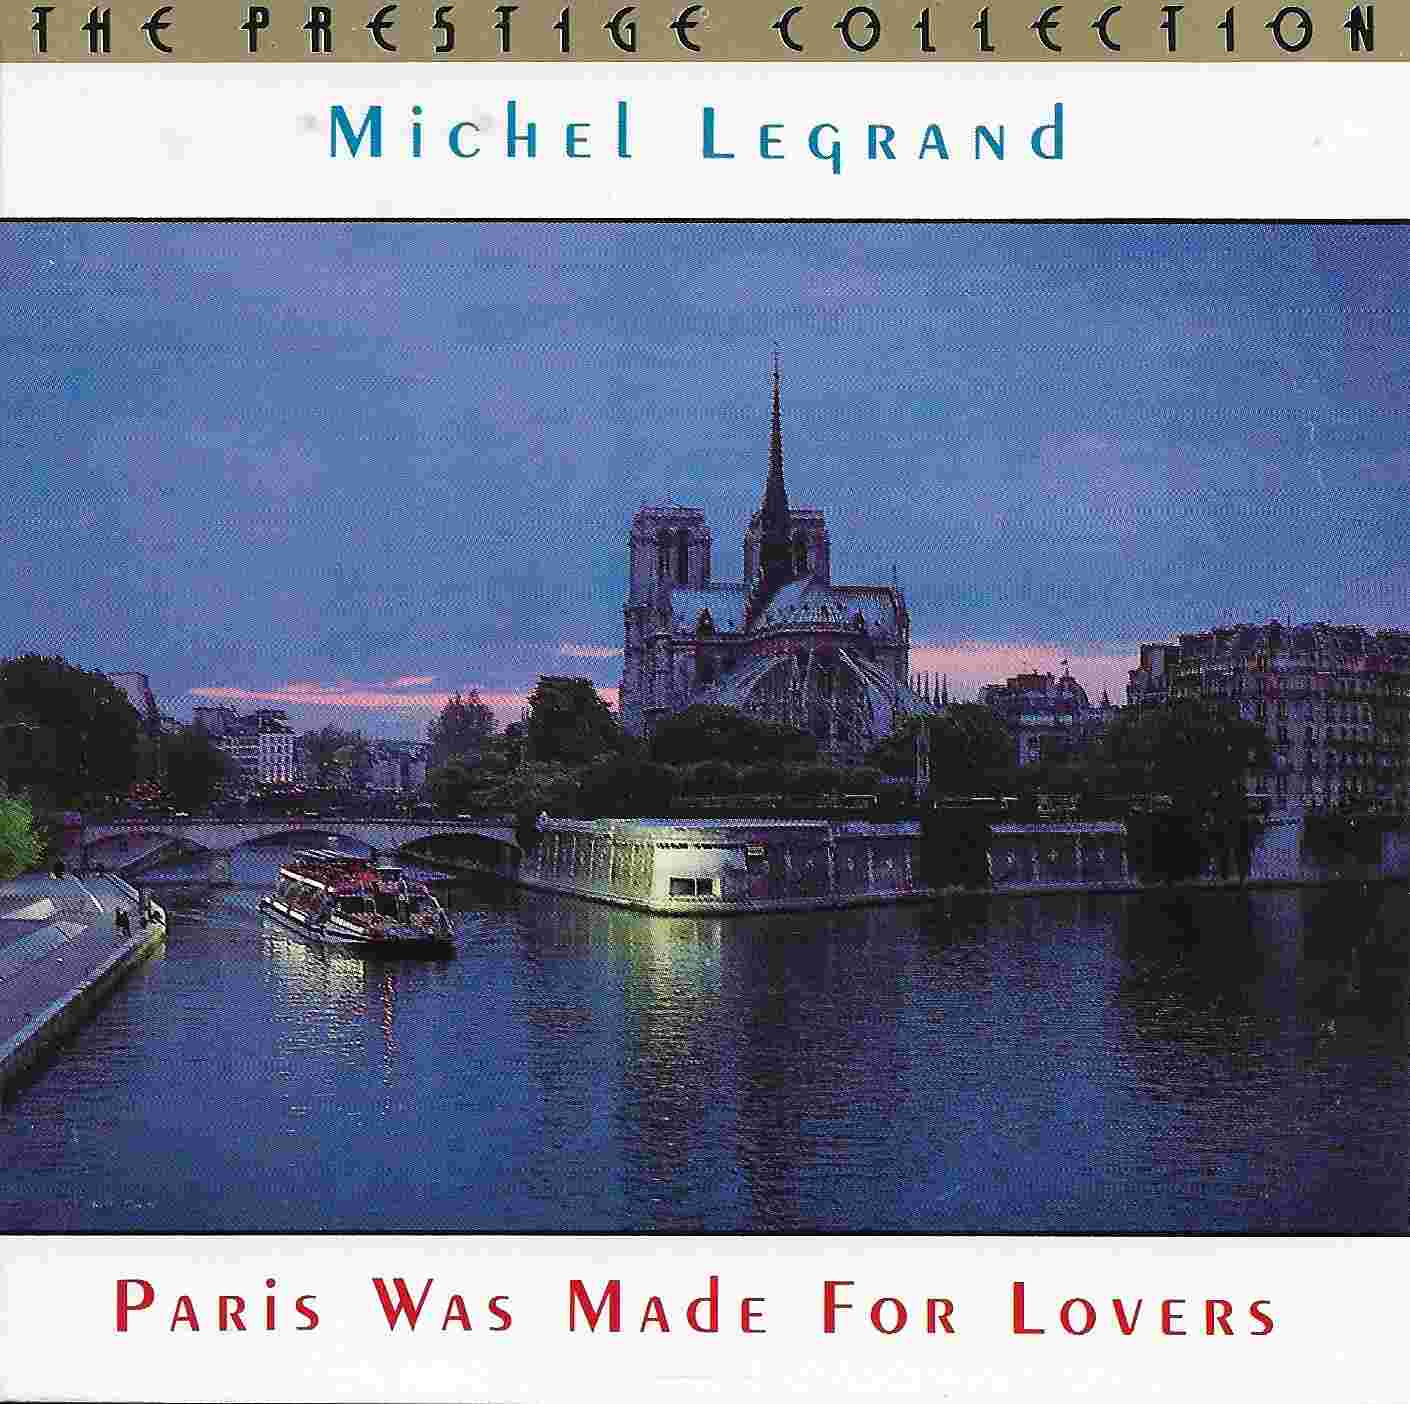 Picture of CDPC 5001 Paris was made for lovers by artist Michael Legrand from the BBC cds - Records and Tapes library